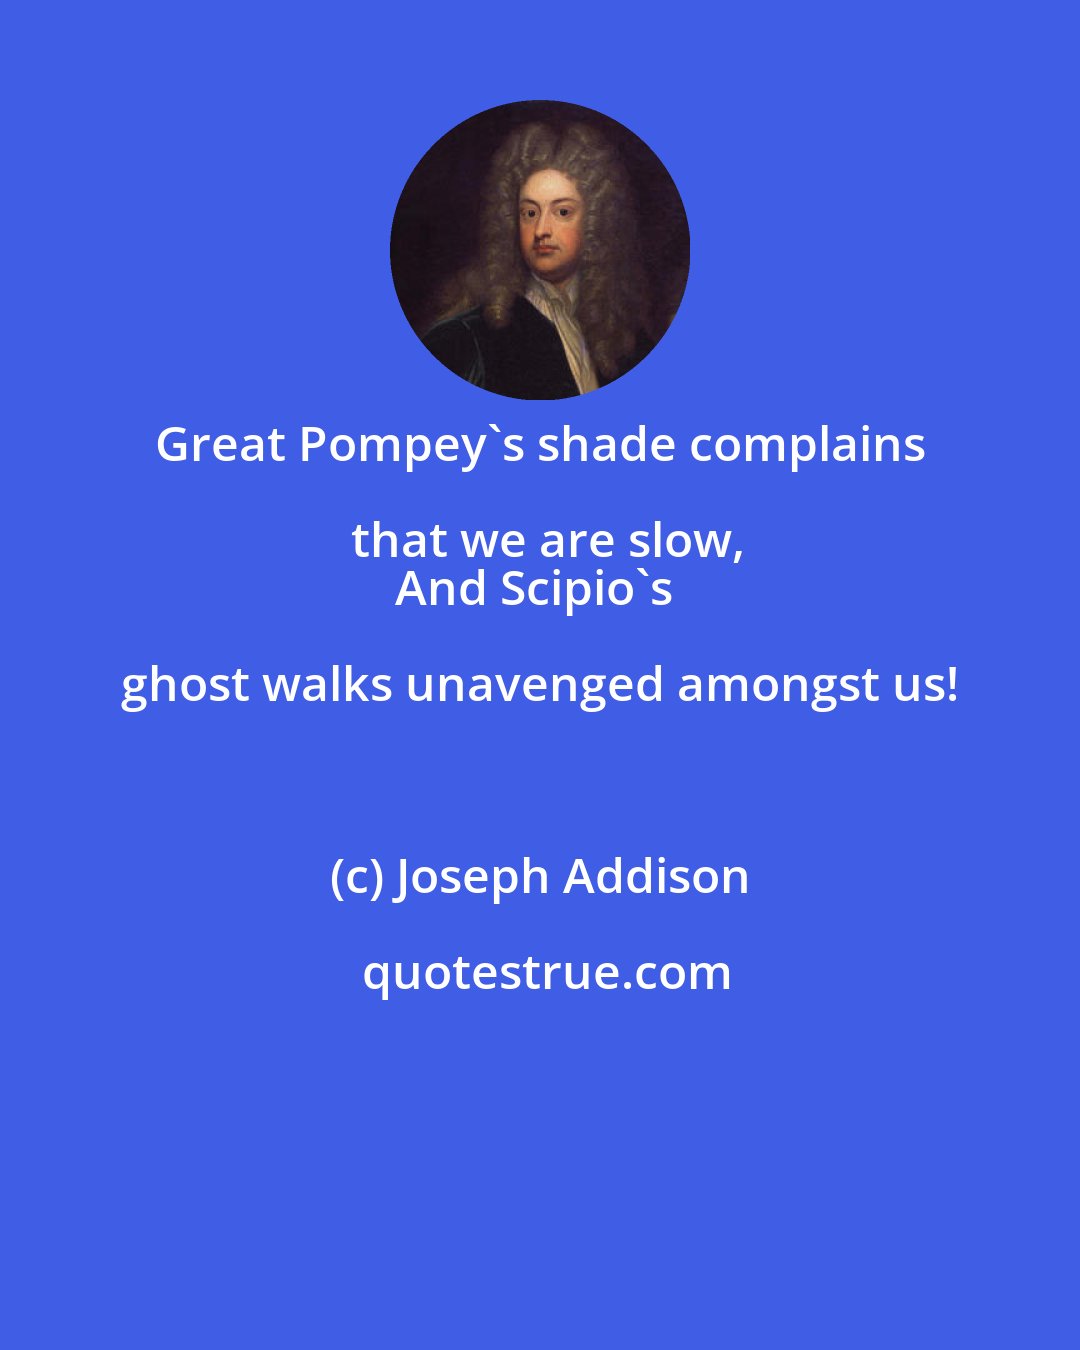 Joseph Addison: Great Pompey's shade complains that we are slow,
And Scipio's ghost walks unavenged amongst us!